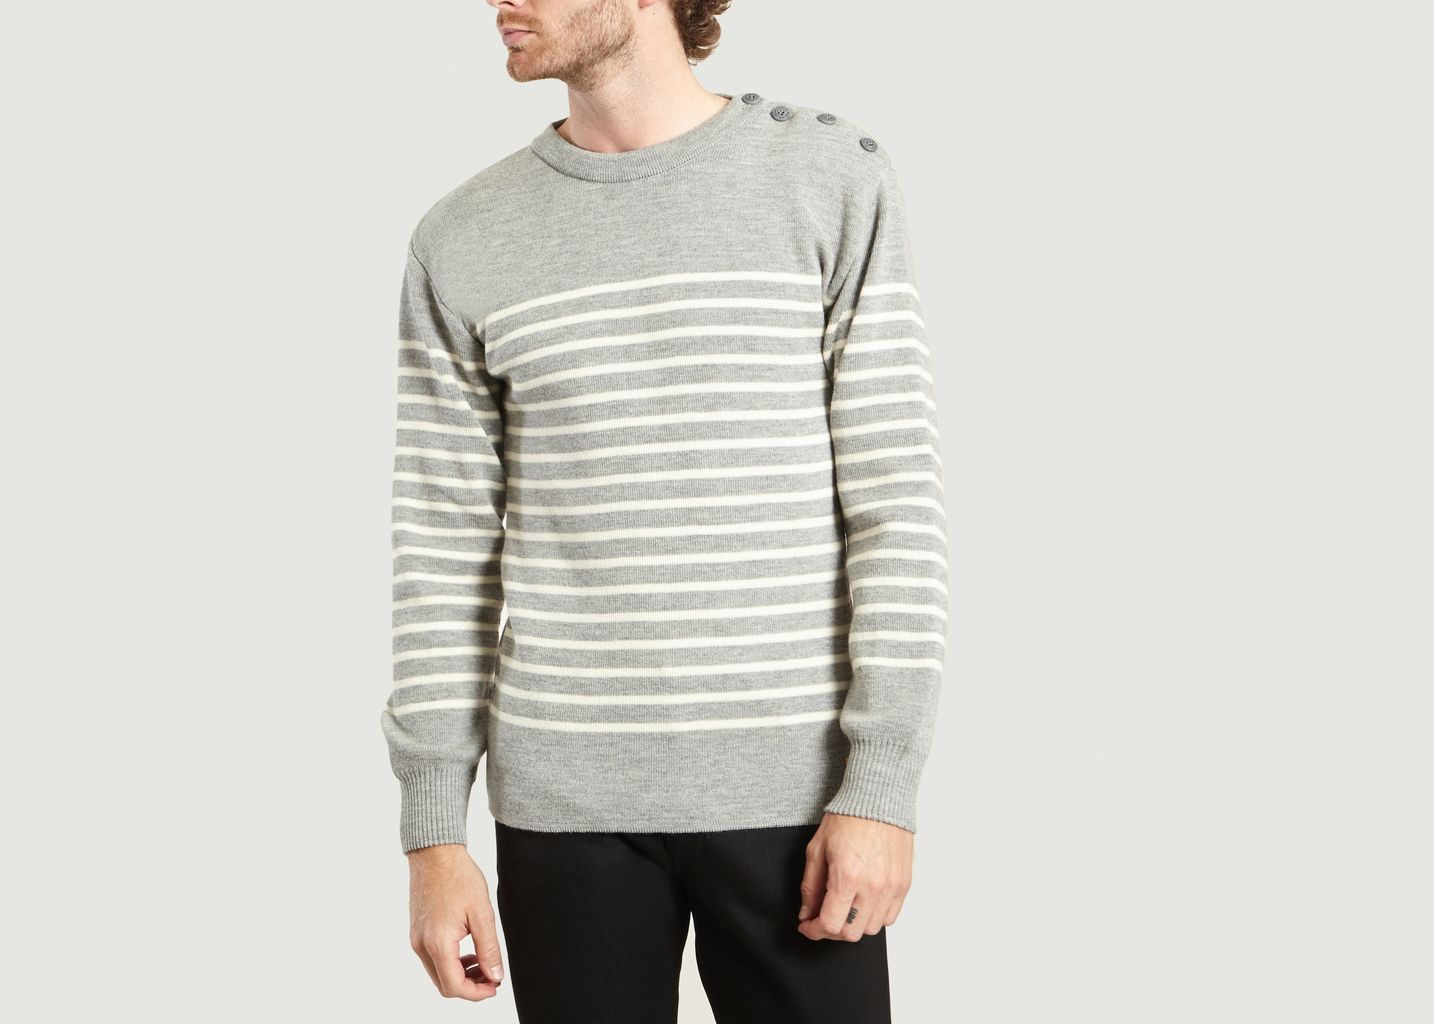 Armor Lux Grey and White Heritage Striped Jumper